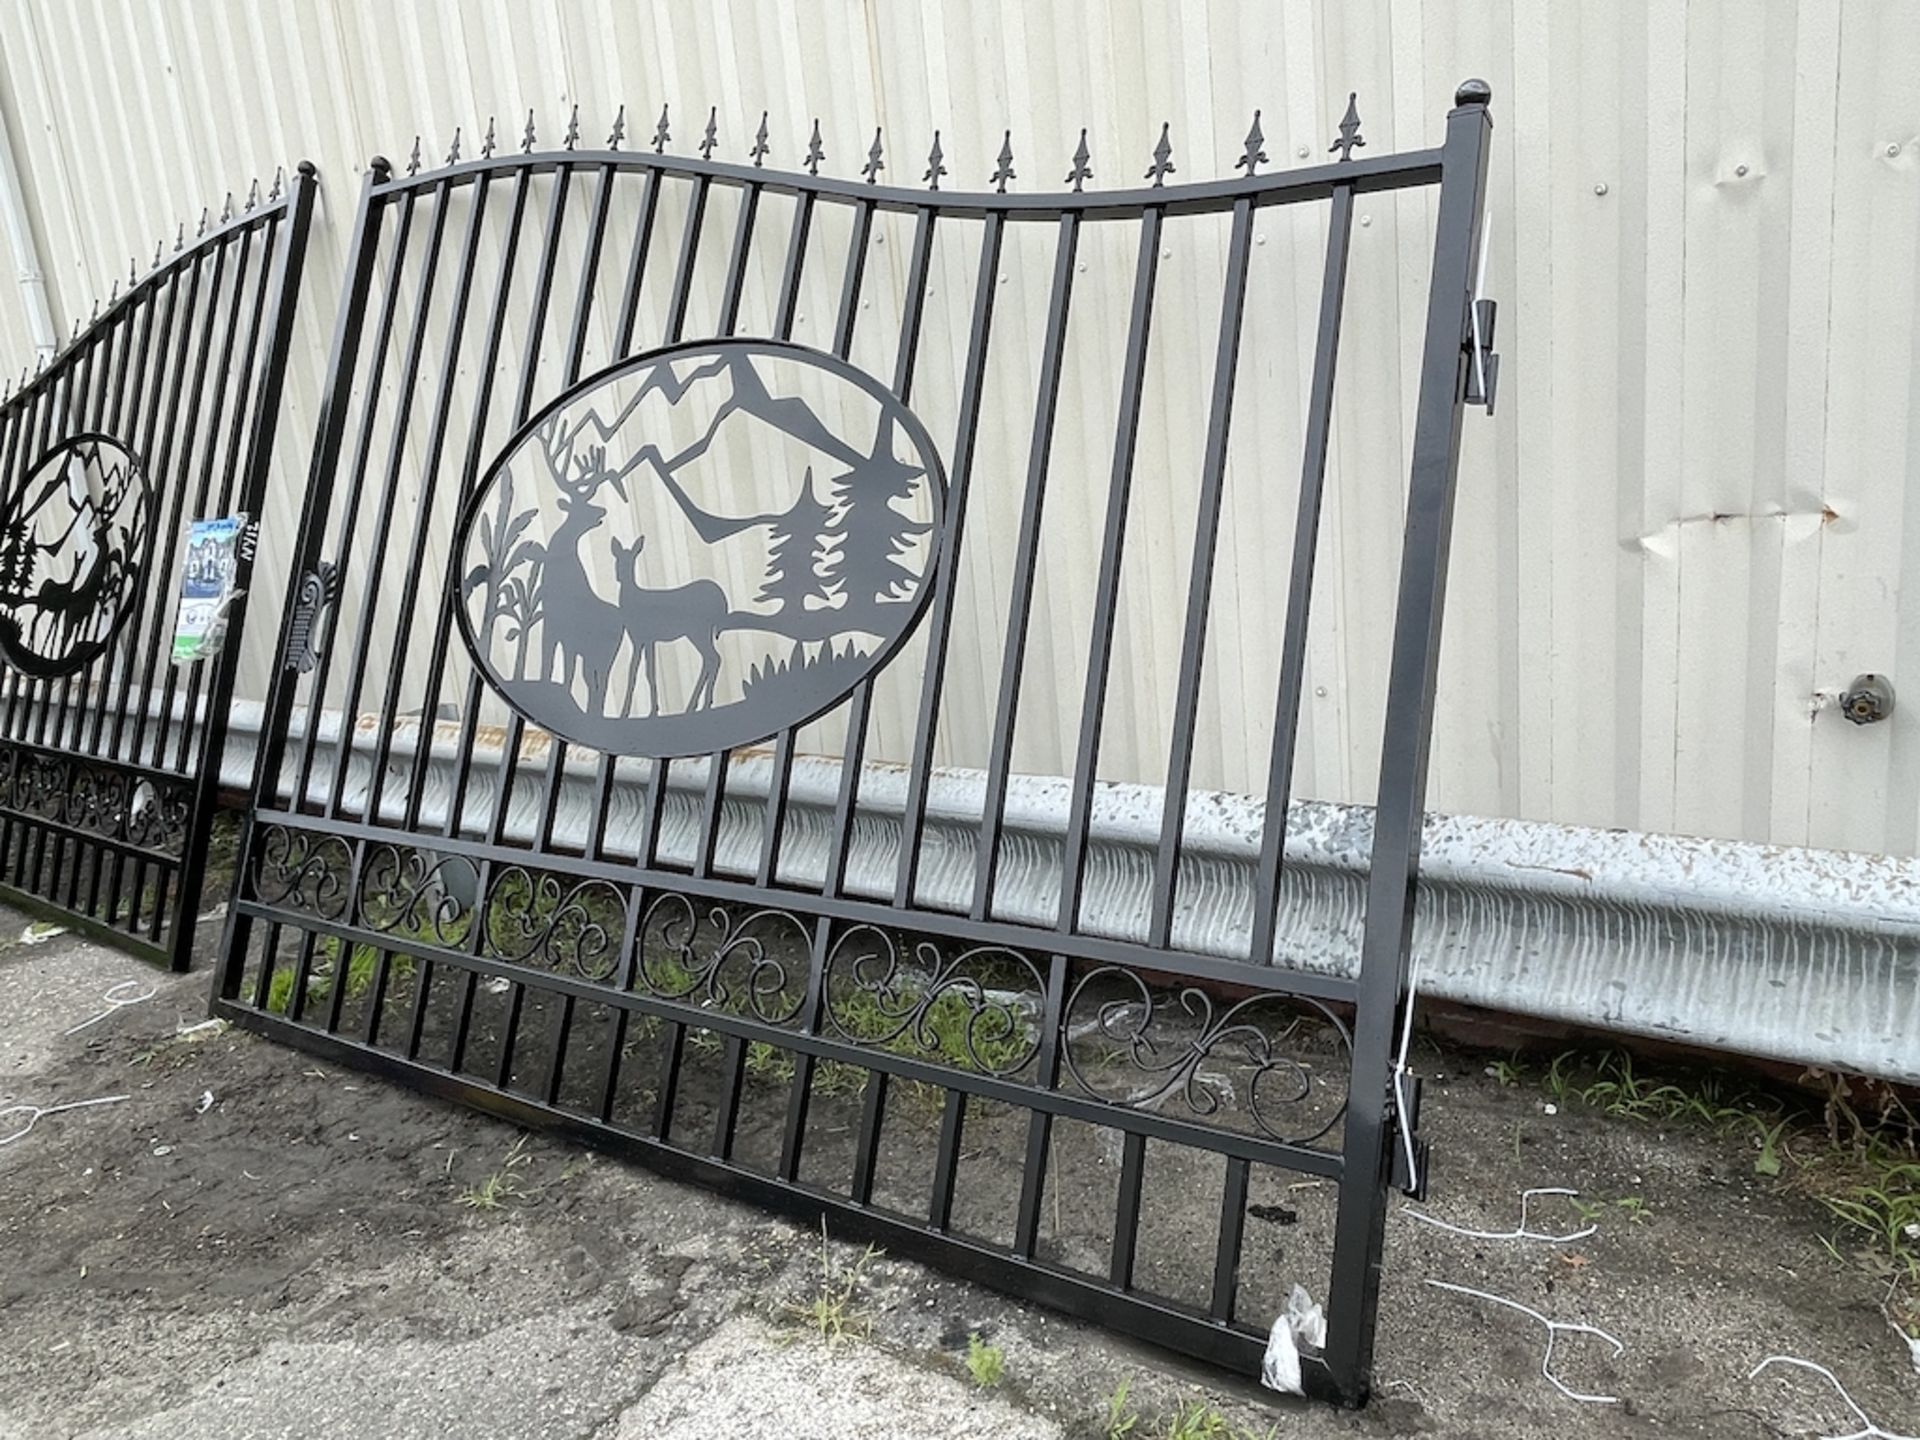 Brand New Unused Greatbear 20ft Wrought Iron Gate (NY119) - Image 3 of 7